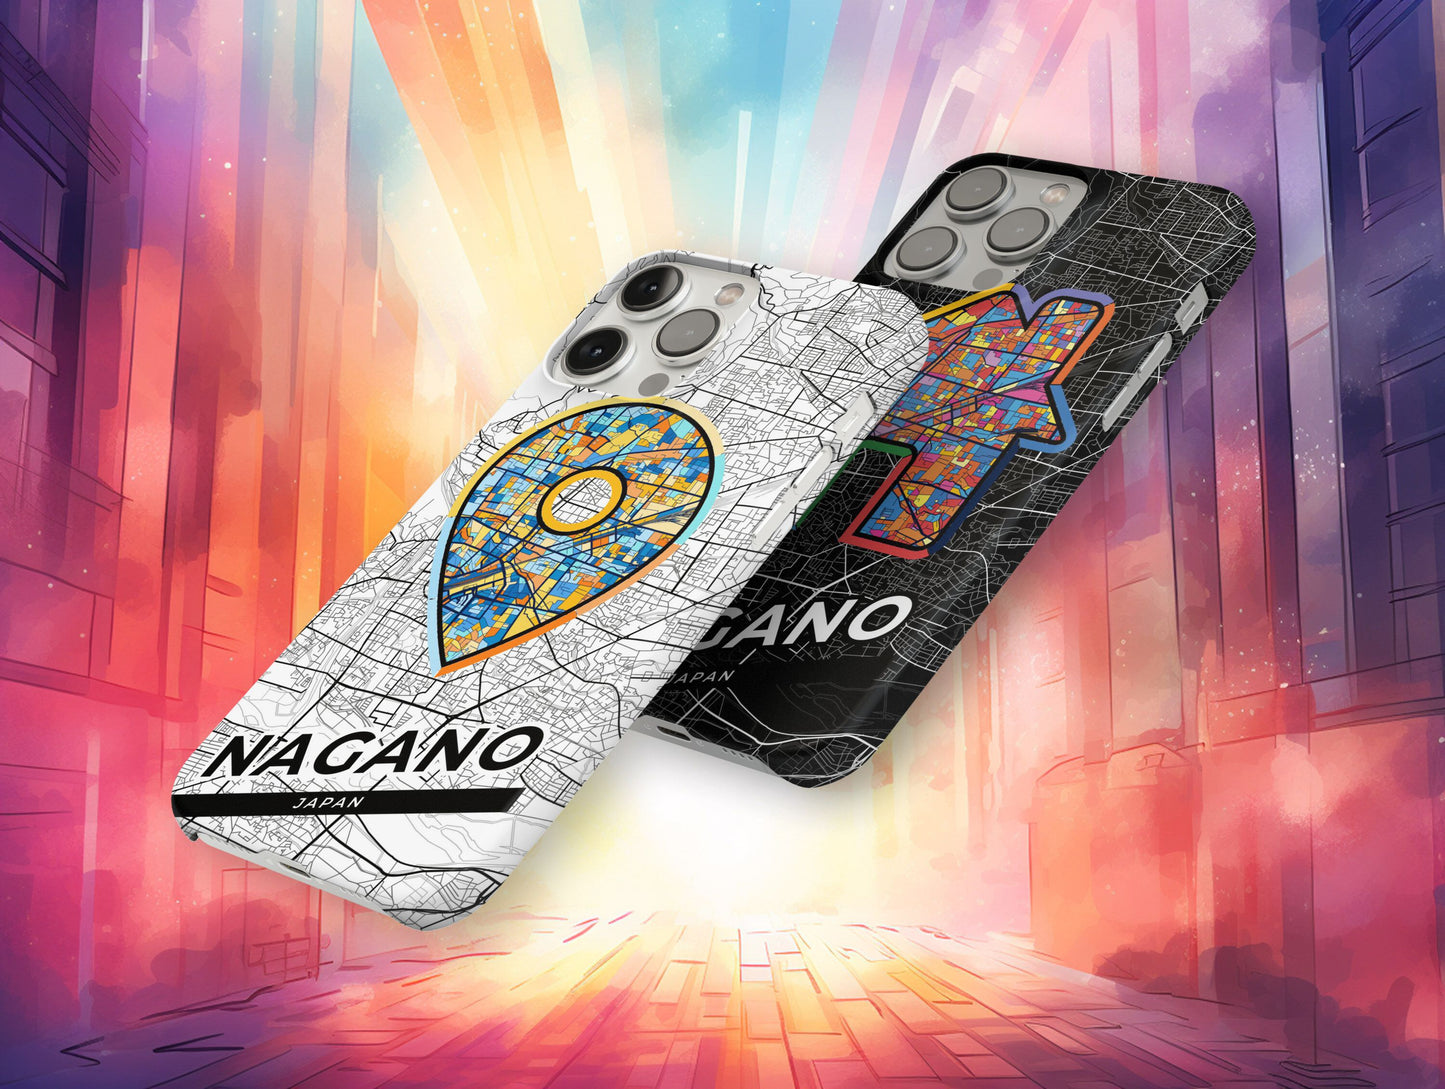 Nagano Japan slim phone case with colorful icon